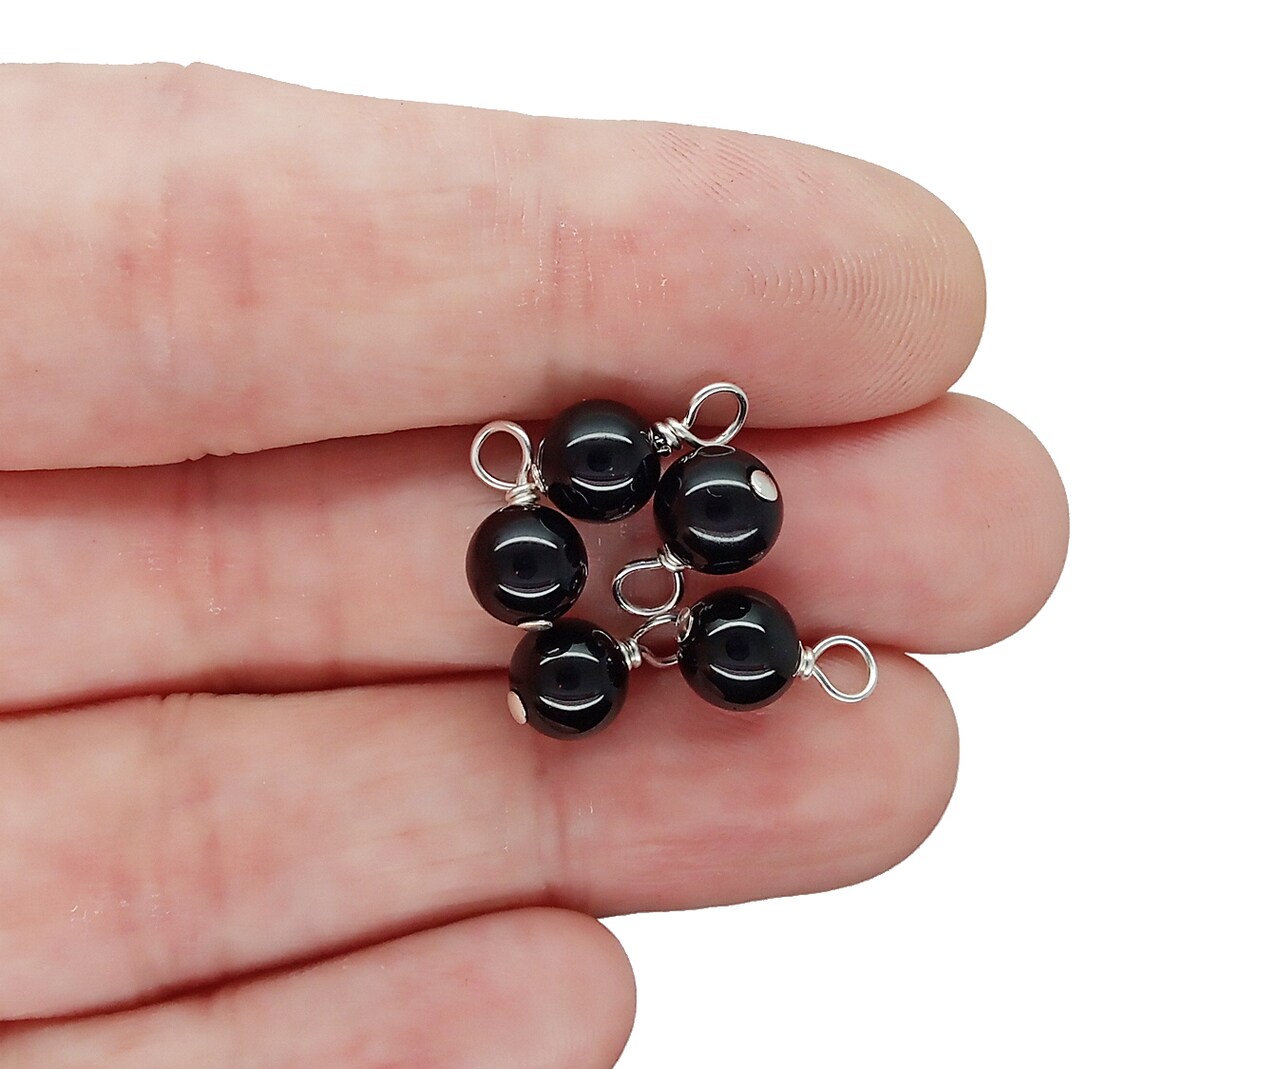 Black Onyx 6mm Bead Dangles, Small Gemstone Charms, 5 or 10 pieces, Adorabilities